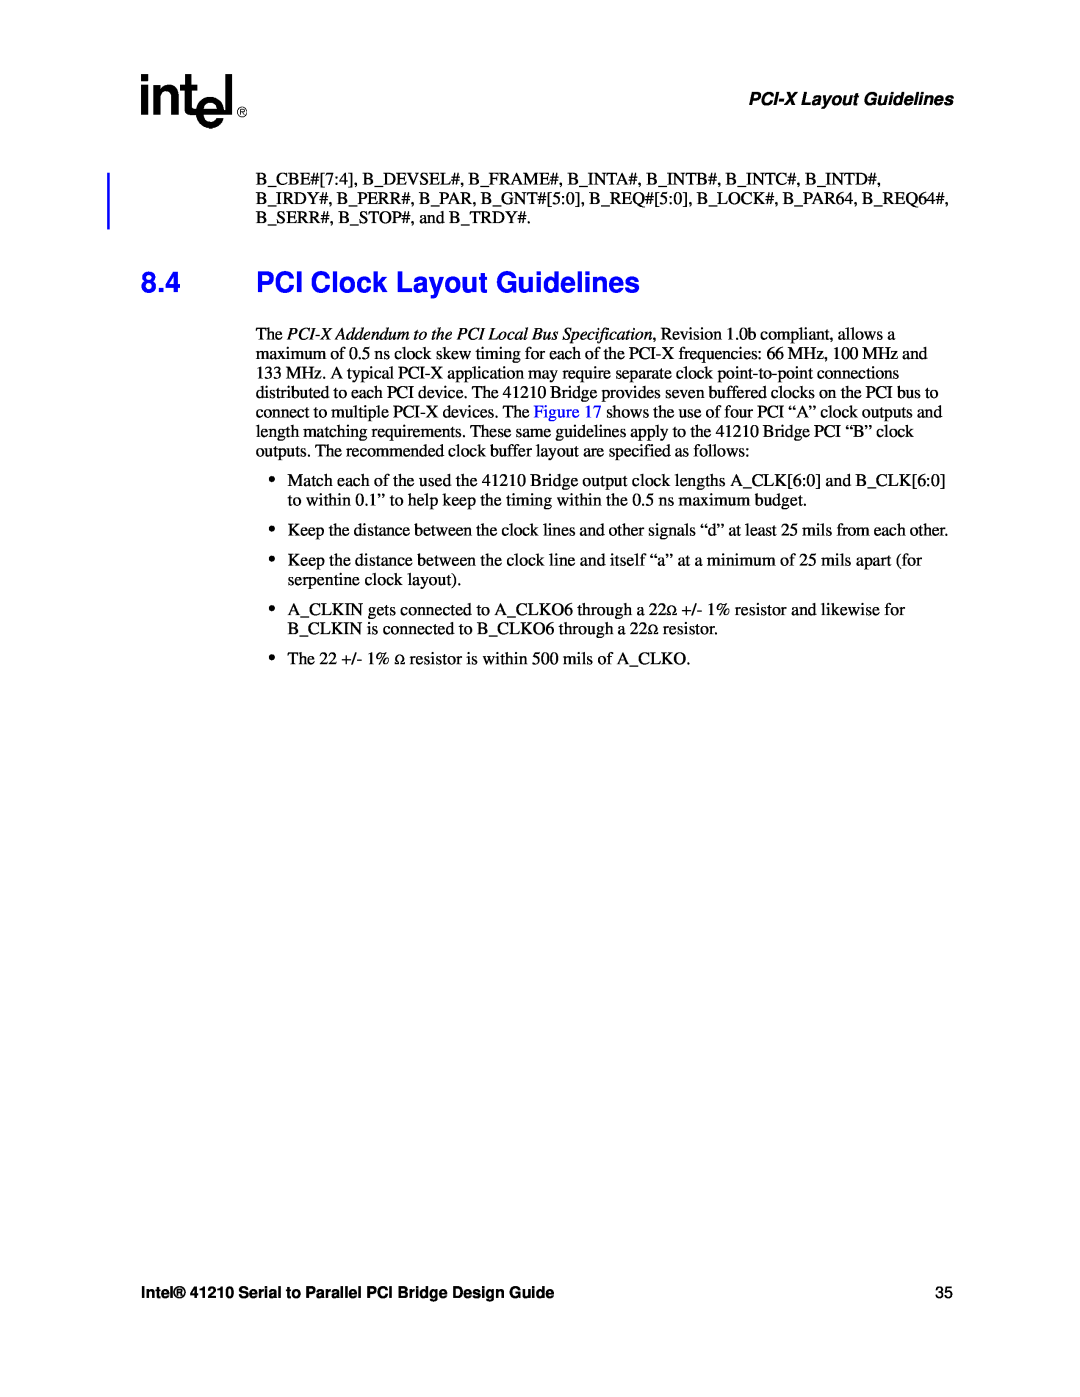 Intel 41210 manual PCI Clock Layout Guidelines, PCI-X Layout Guidelines 